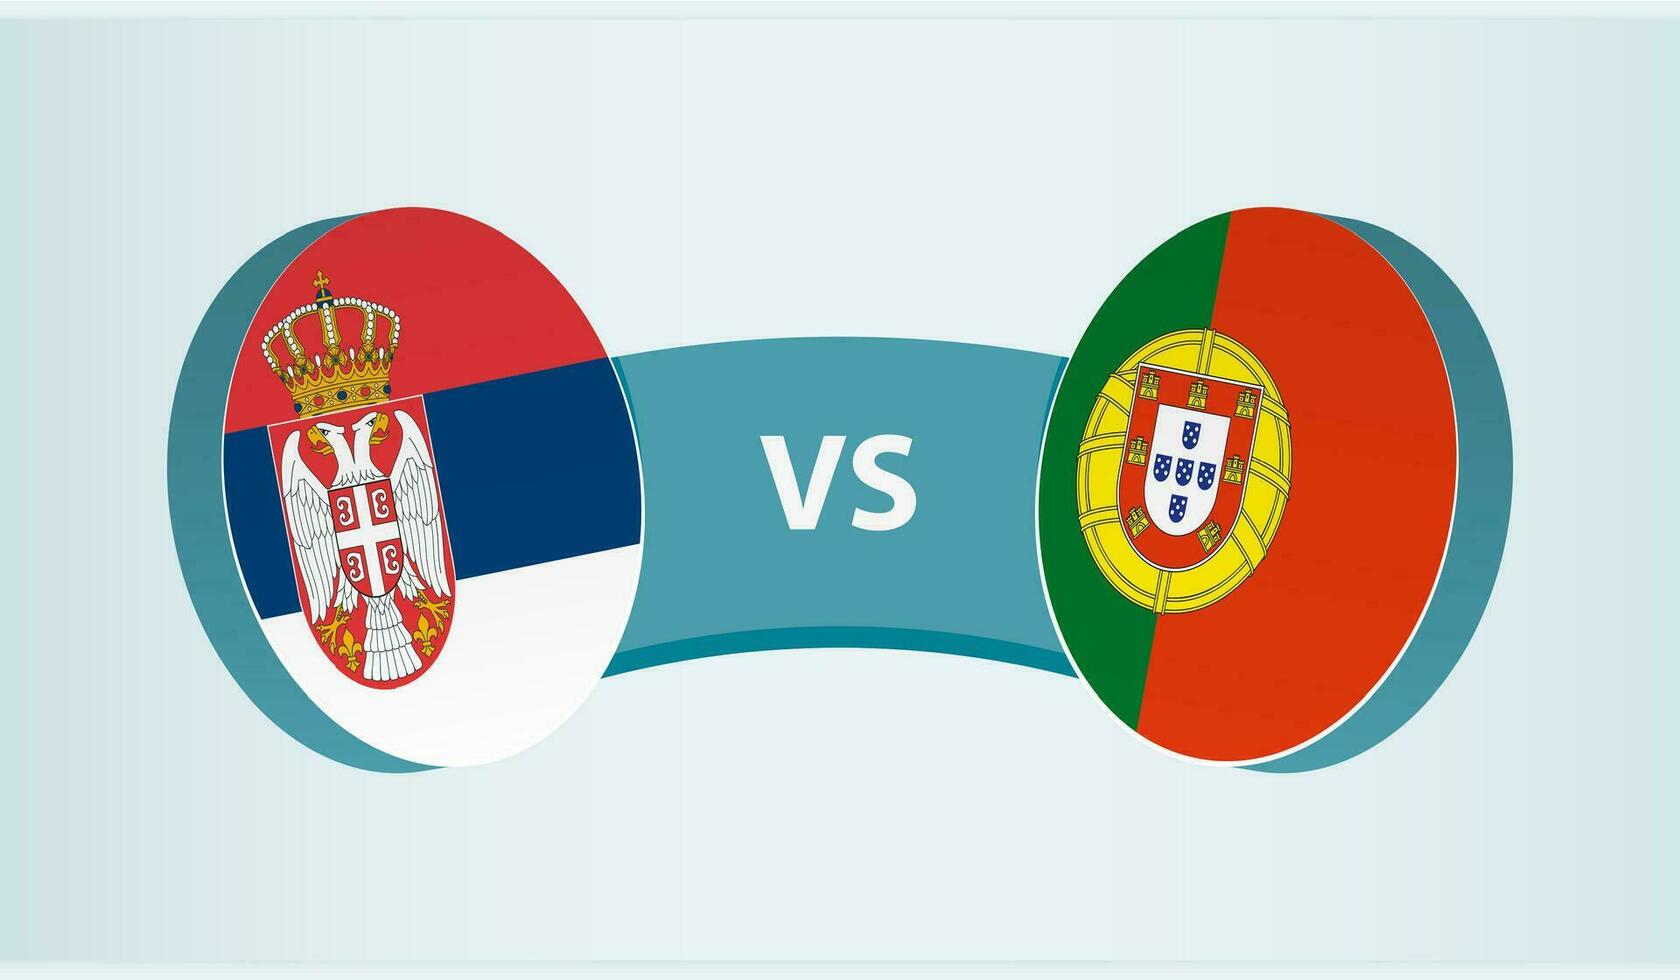 Serbia versus Portugal, team sports competition concept. vector